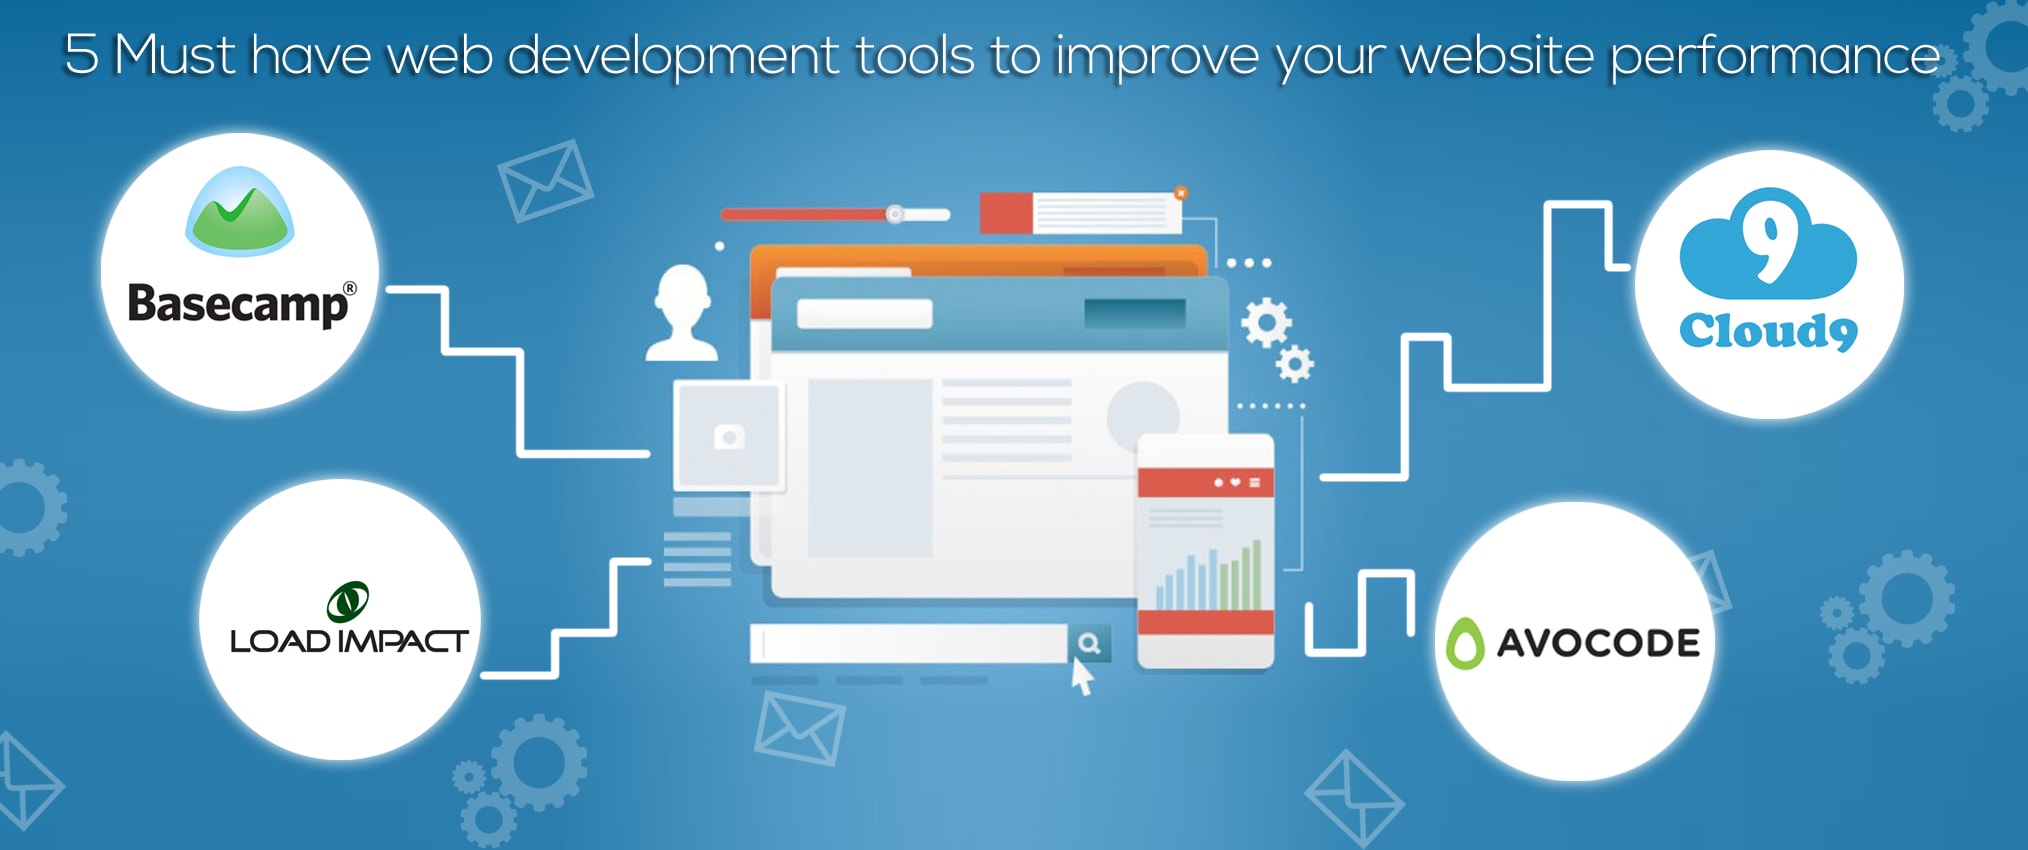 5 Must have web development tools to improve your website performance-min